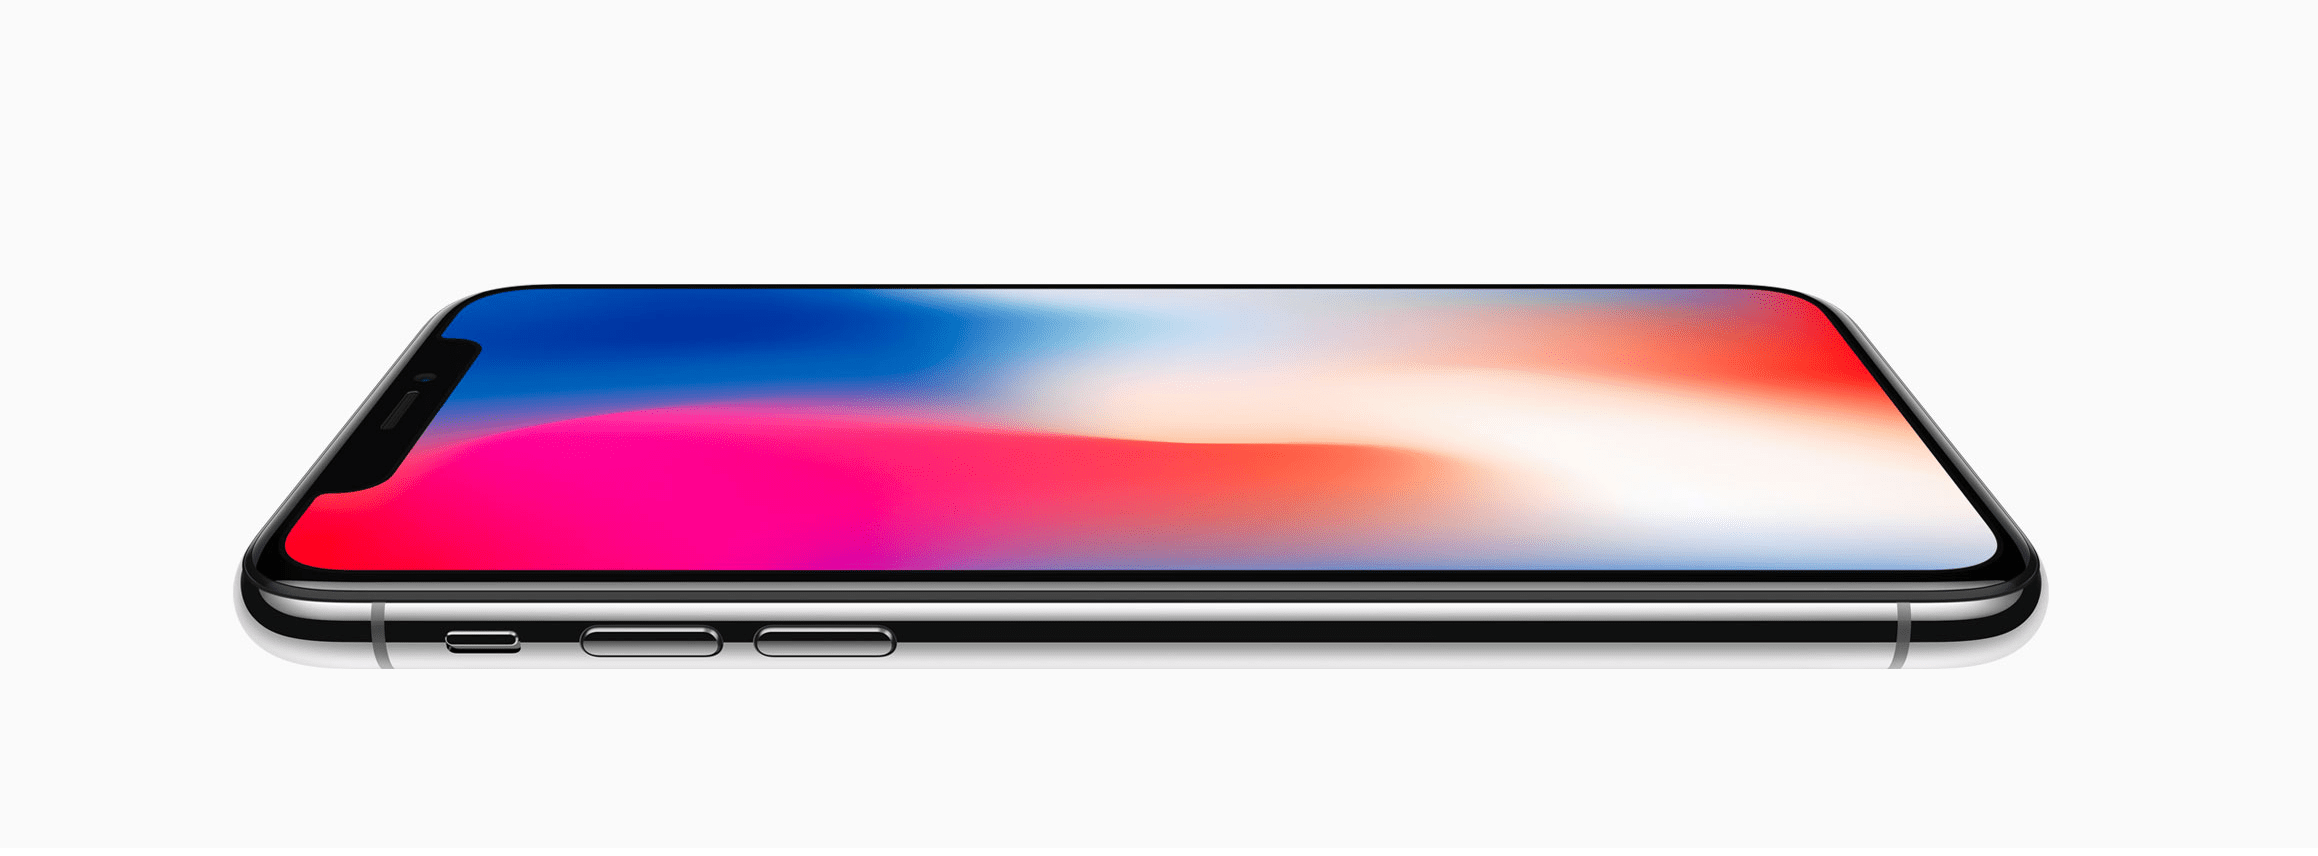 The iPhone X deep-dive – Why this phone will disrupt the mobile imaging ecosystem – Kaptur